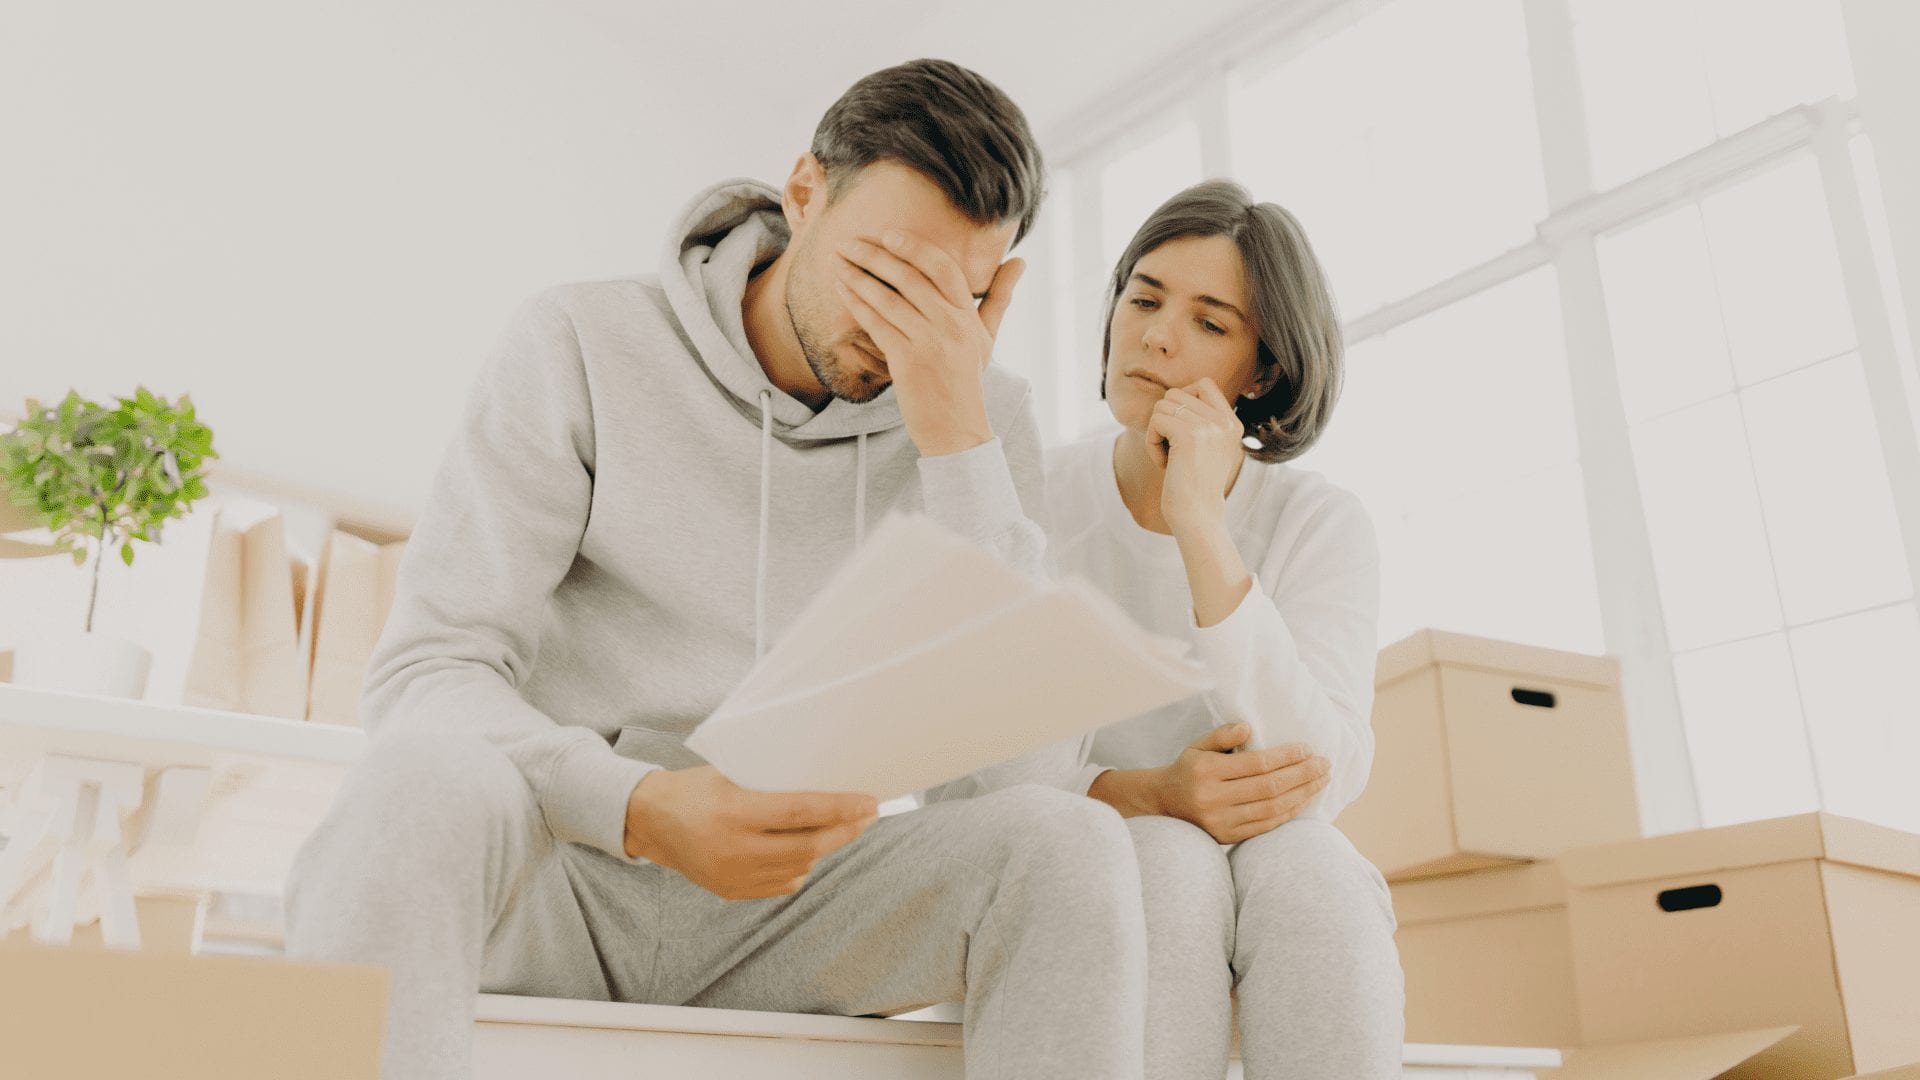 couple in debt frustrated with paperwork